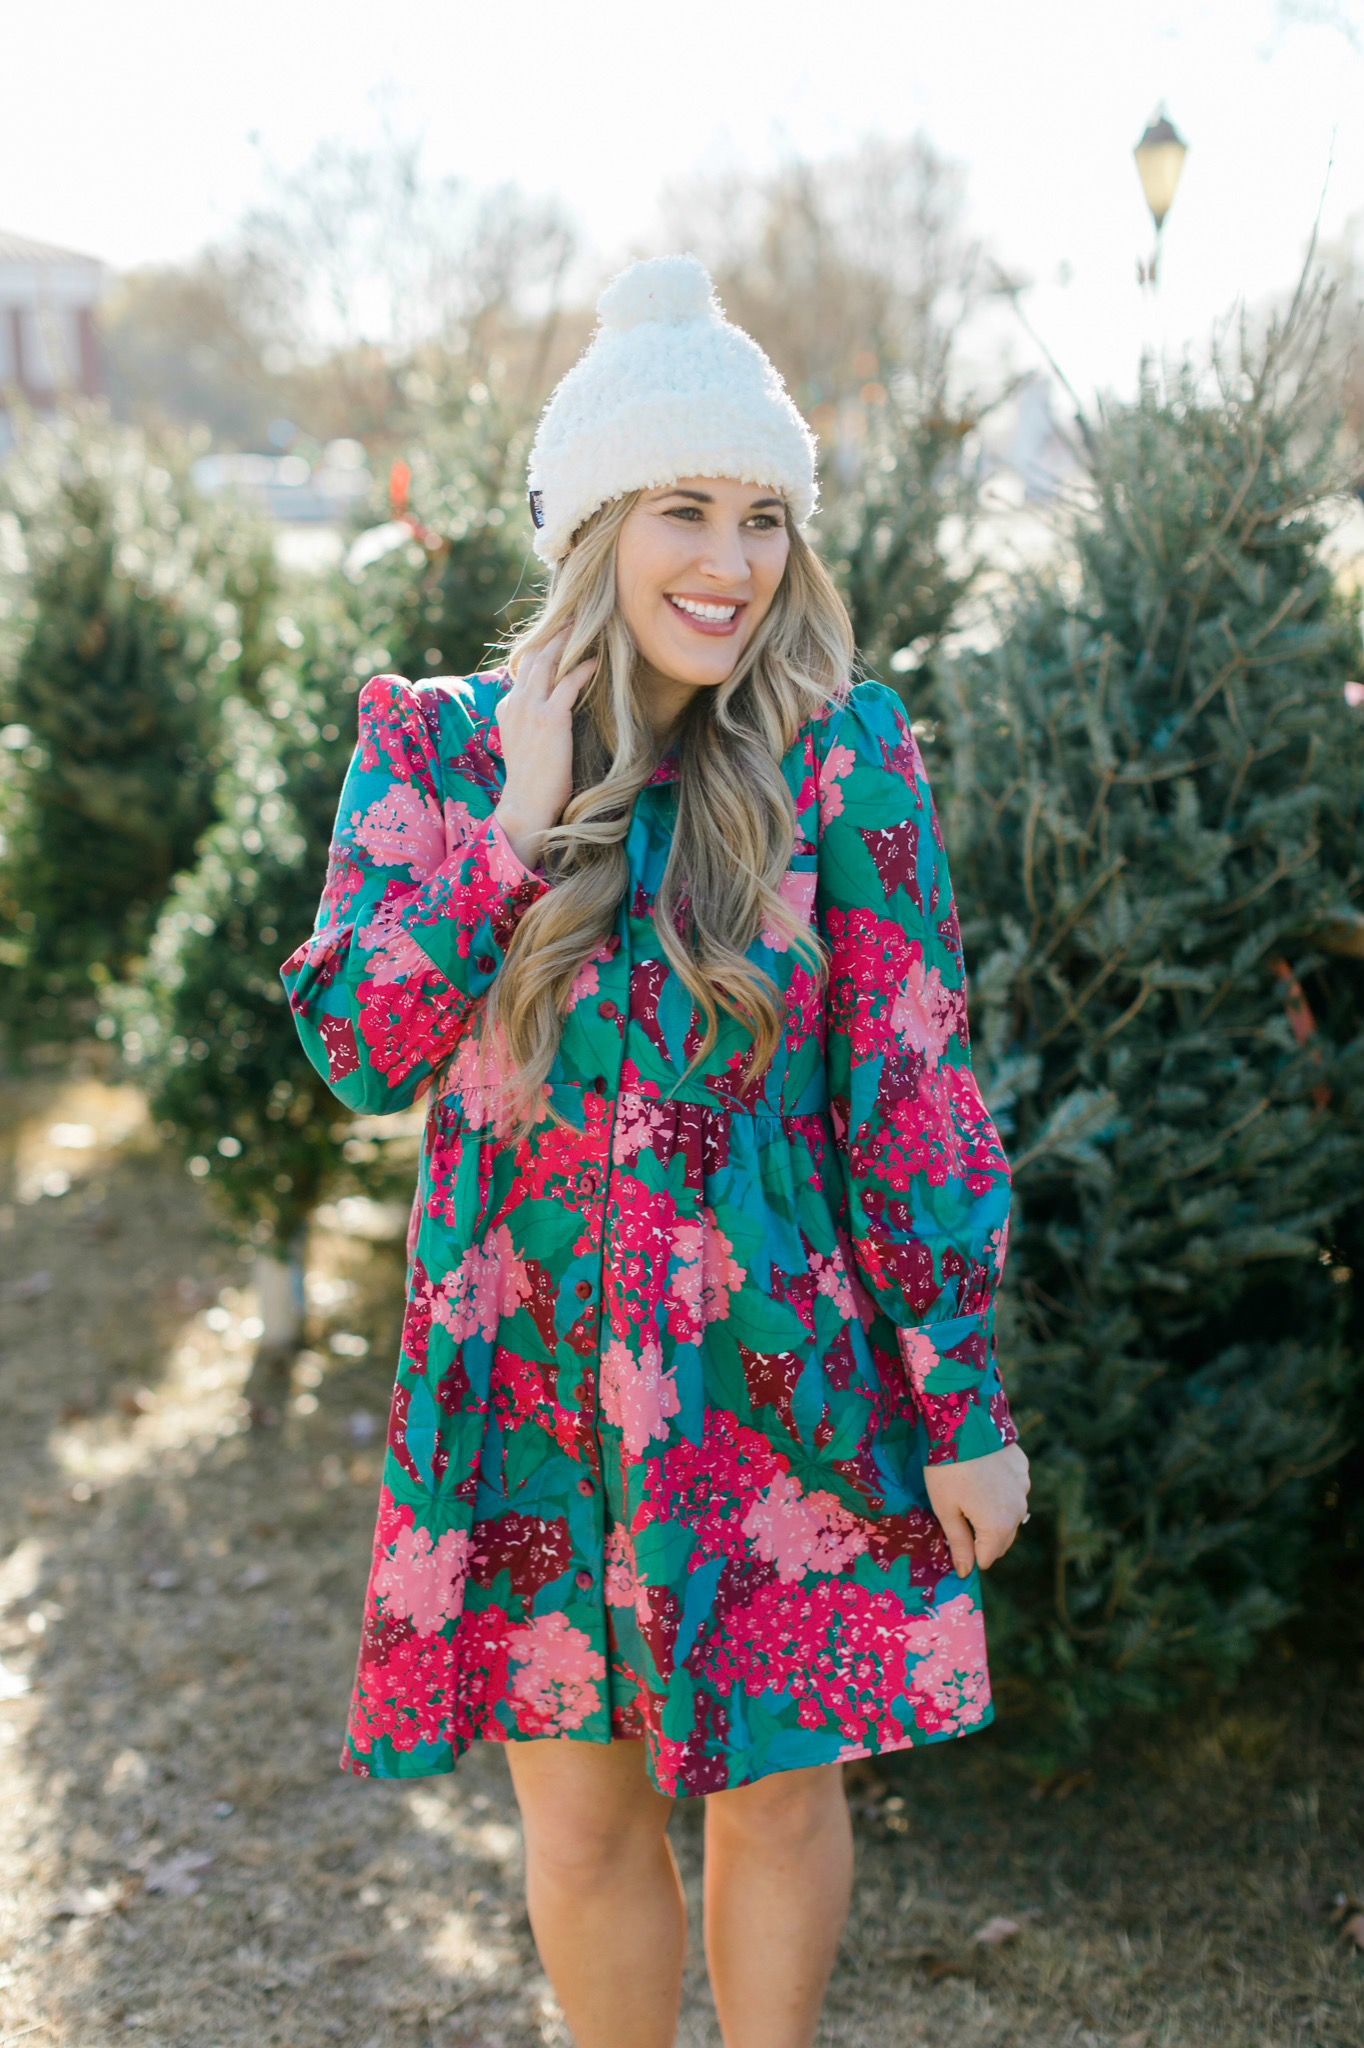 Winter floral look styled by top Memphis fashion blogger, Walking in Memphis in High Heels: image of a woman wearing a Tuckernuck floral shirt dress, Vince Camuto Selindra pumps and MUK LUKS pom hat.